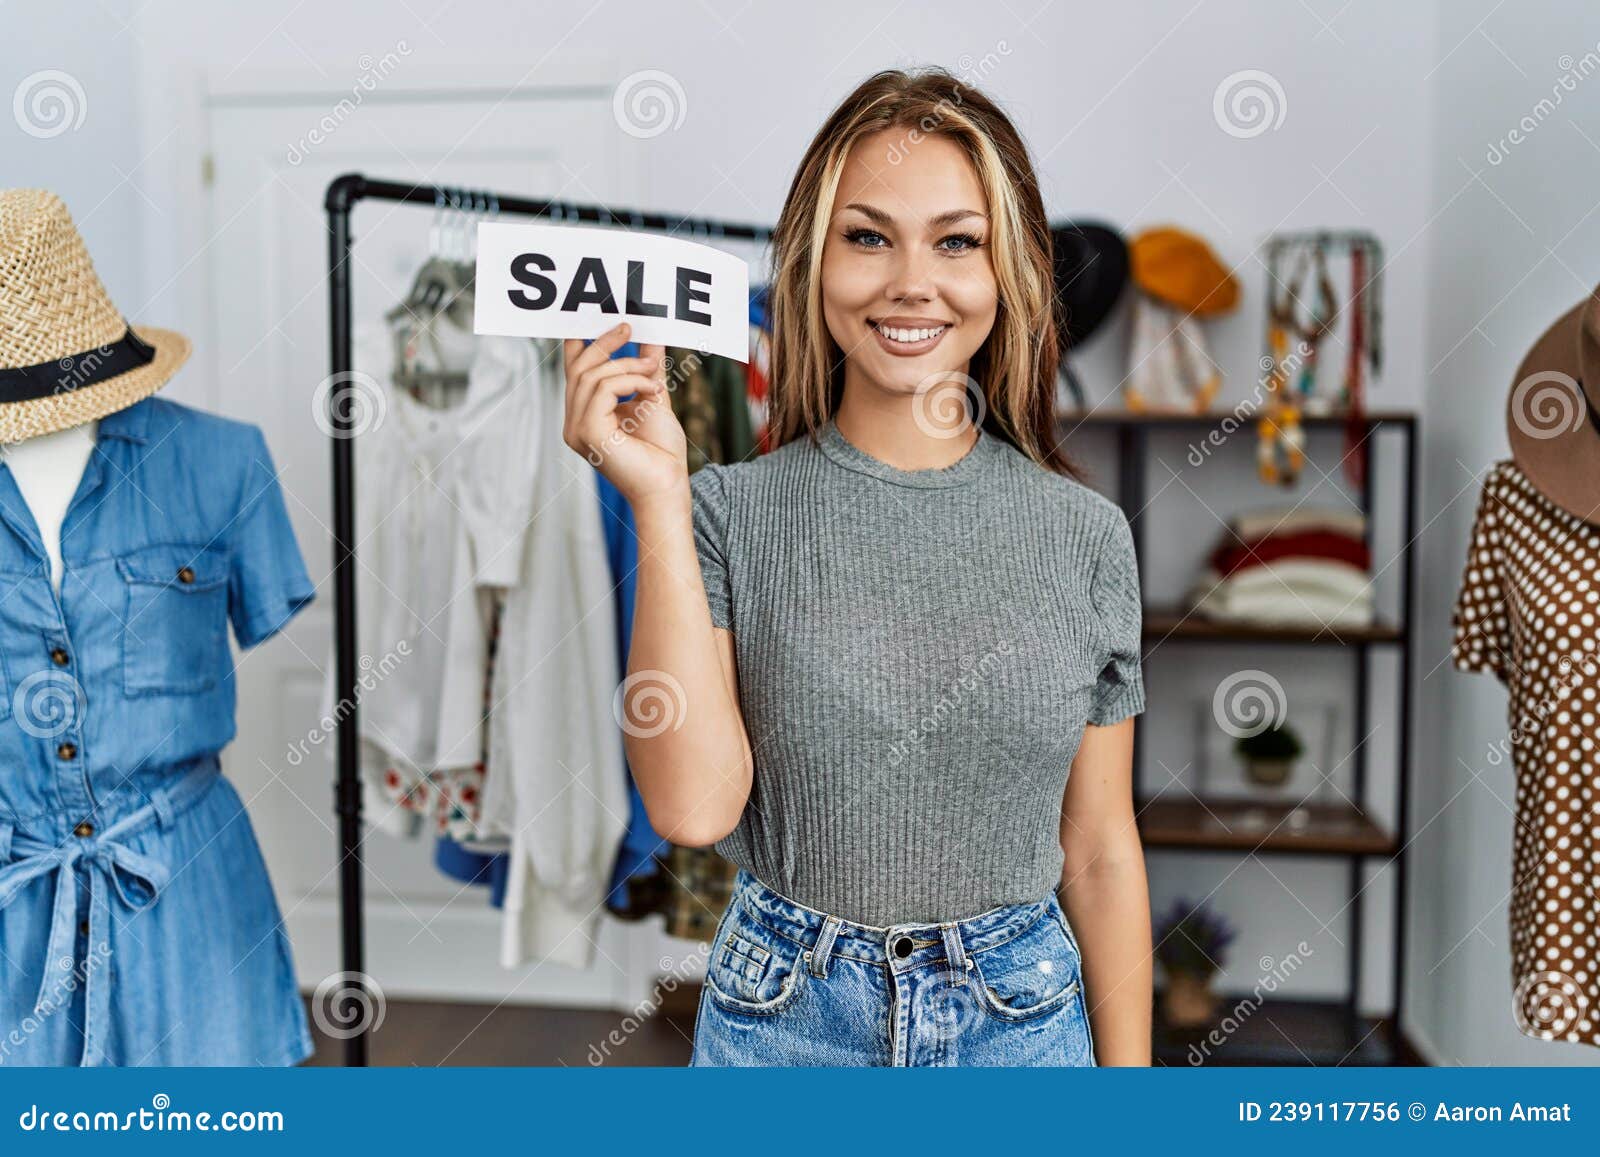 Young Caucasian Woman Holding Sale Poster at Retail Shop Looking ...